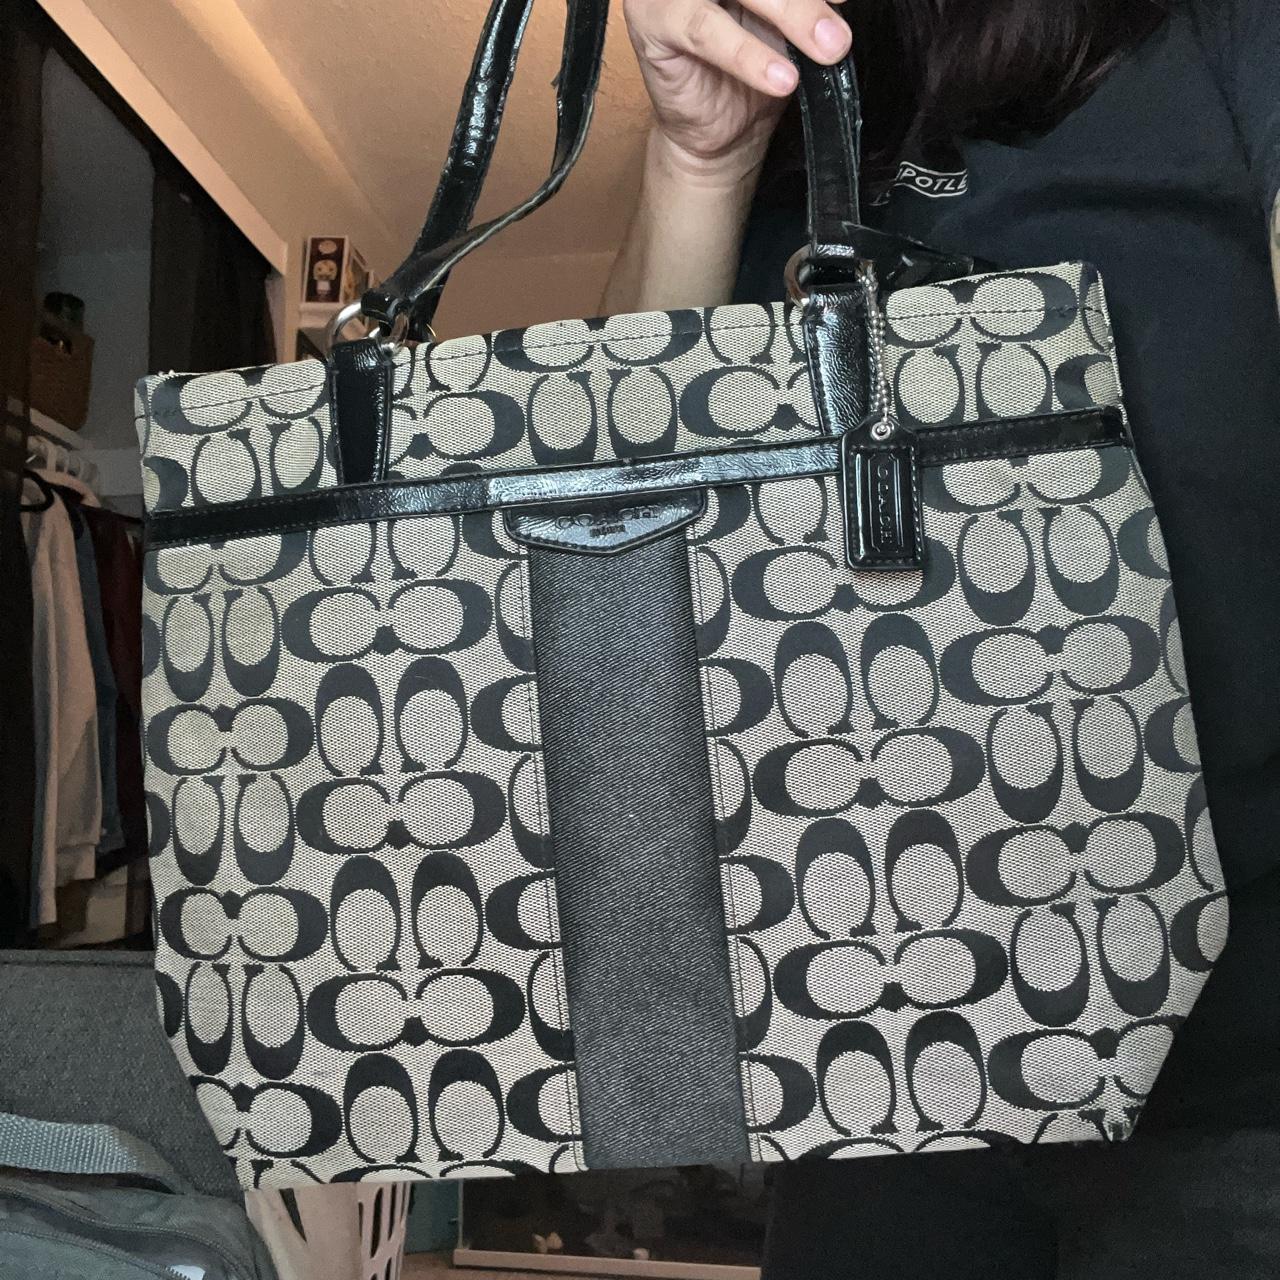 What Makes a Purse Look Inexpensive? - PurseBlog